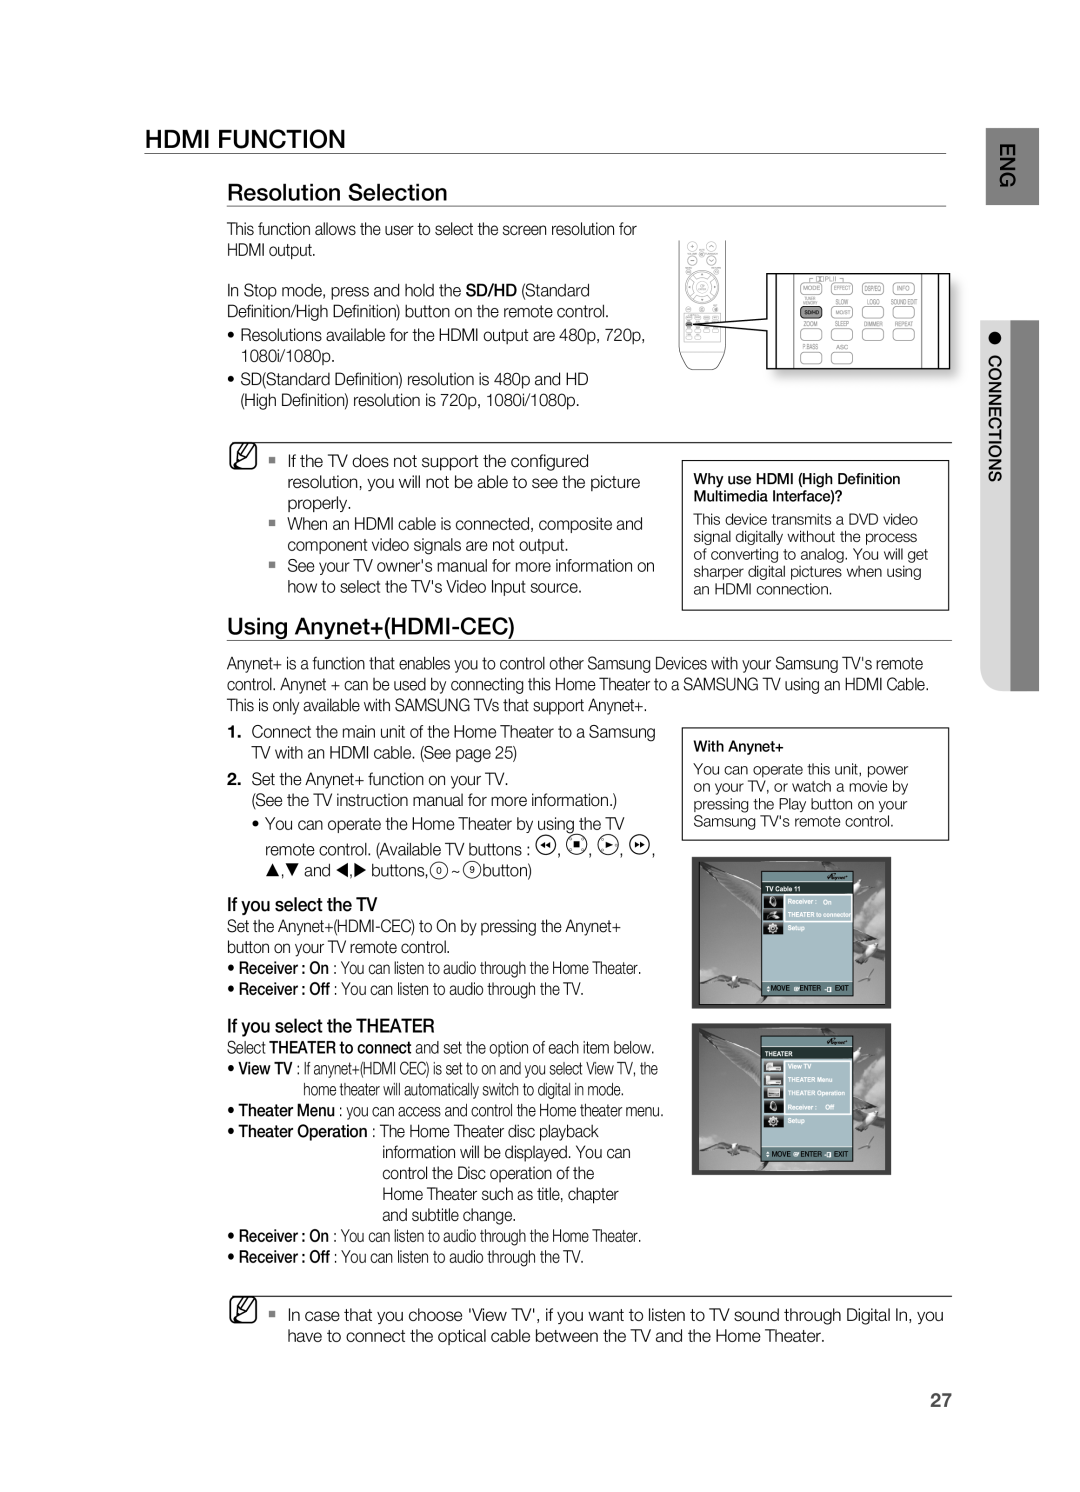 Samsung HT-TWZ415 user manual Hdmi Function, resolution Selection, Using Anynet+HDMI-CEC 